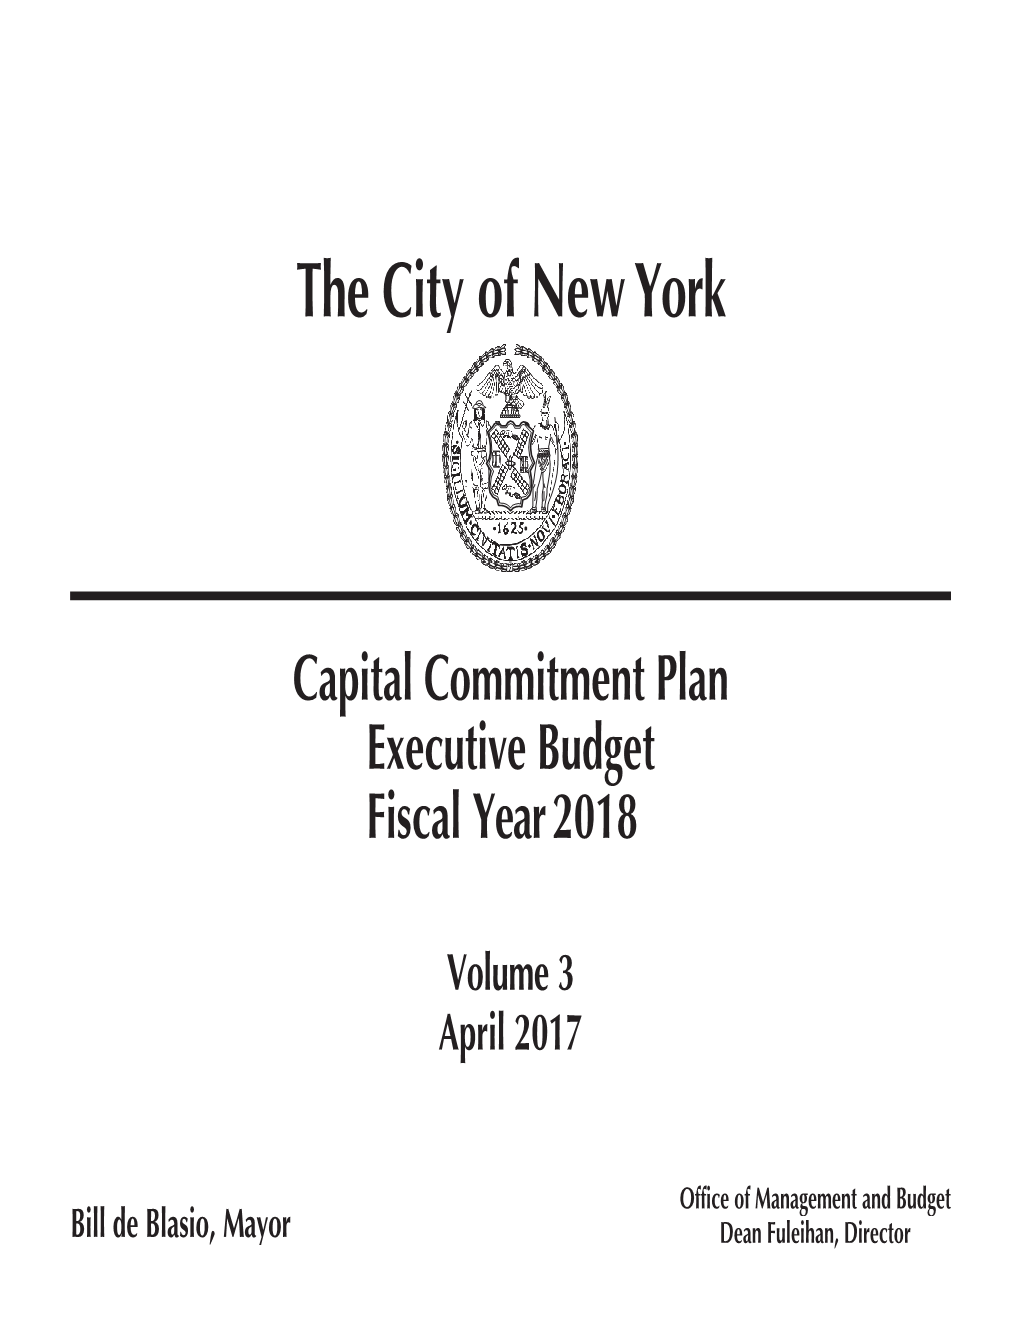 FY 2018 Executive Budget Commitment Plan